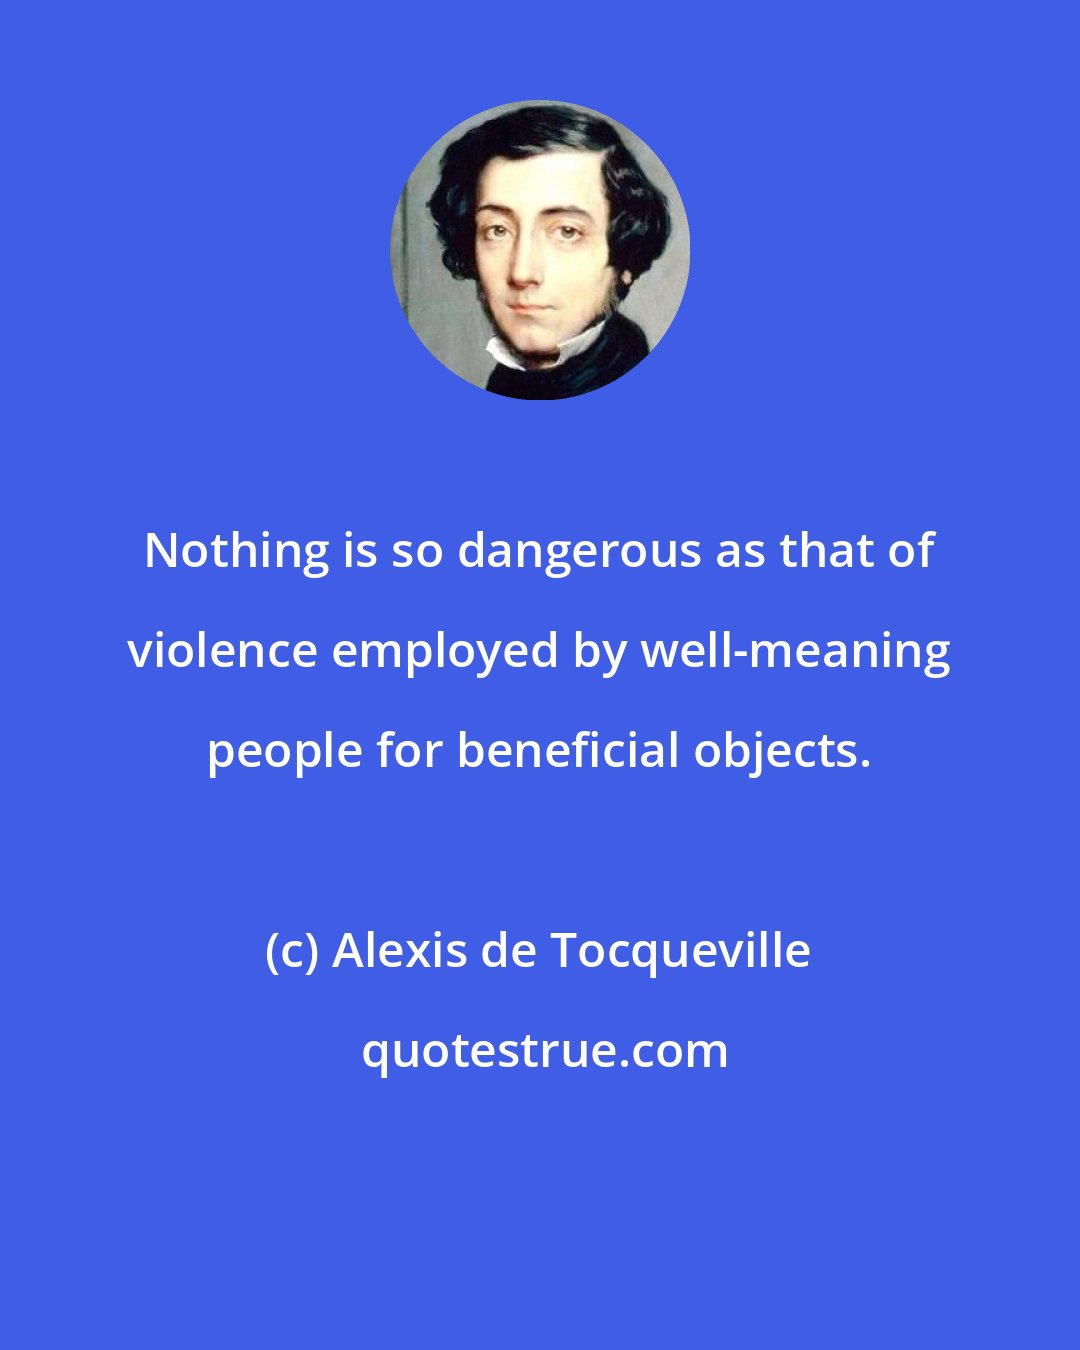 Alexis de Tocqueville: Nothing is so dangerous as that of violence employed by well-meaning people for beneficial objects.